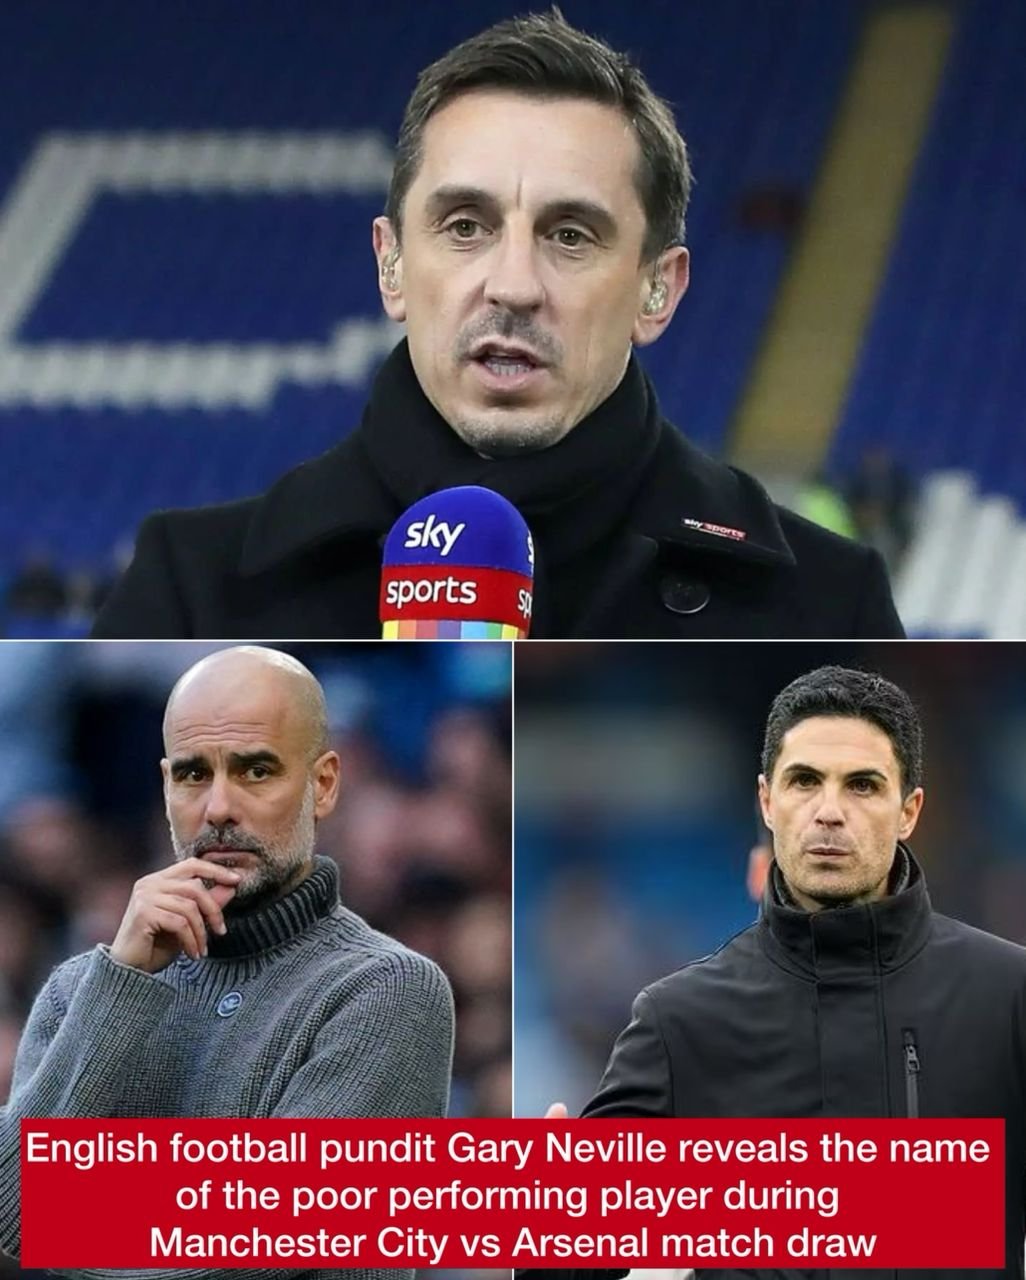 English football pundit Gary Neville reveals the name of the poor performing player during Manchester City vs Arsenal match draw